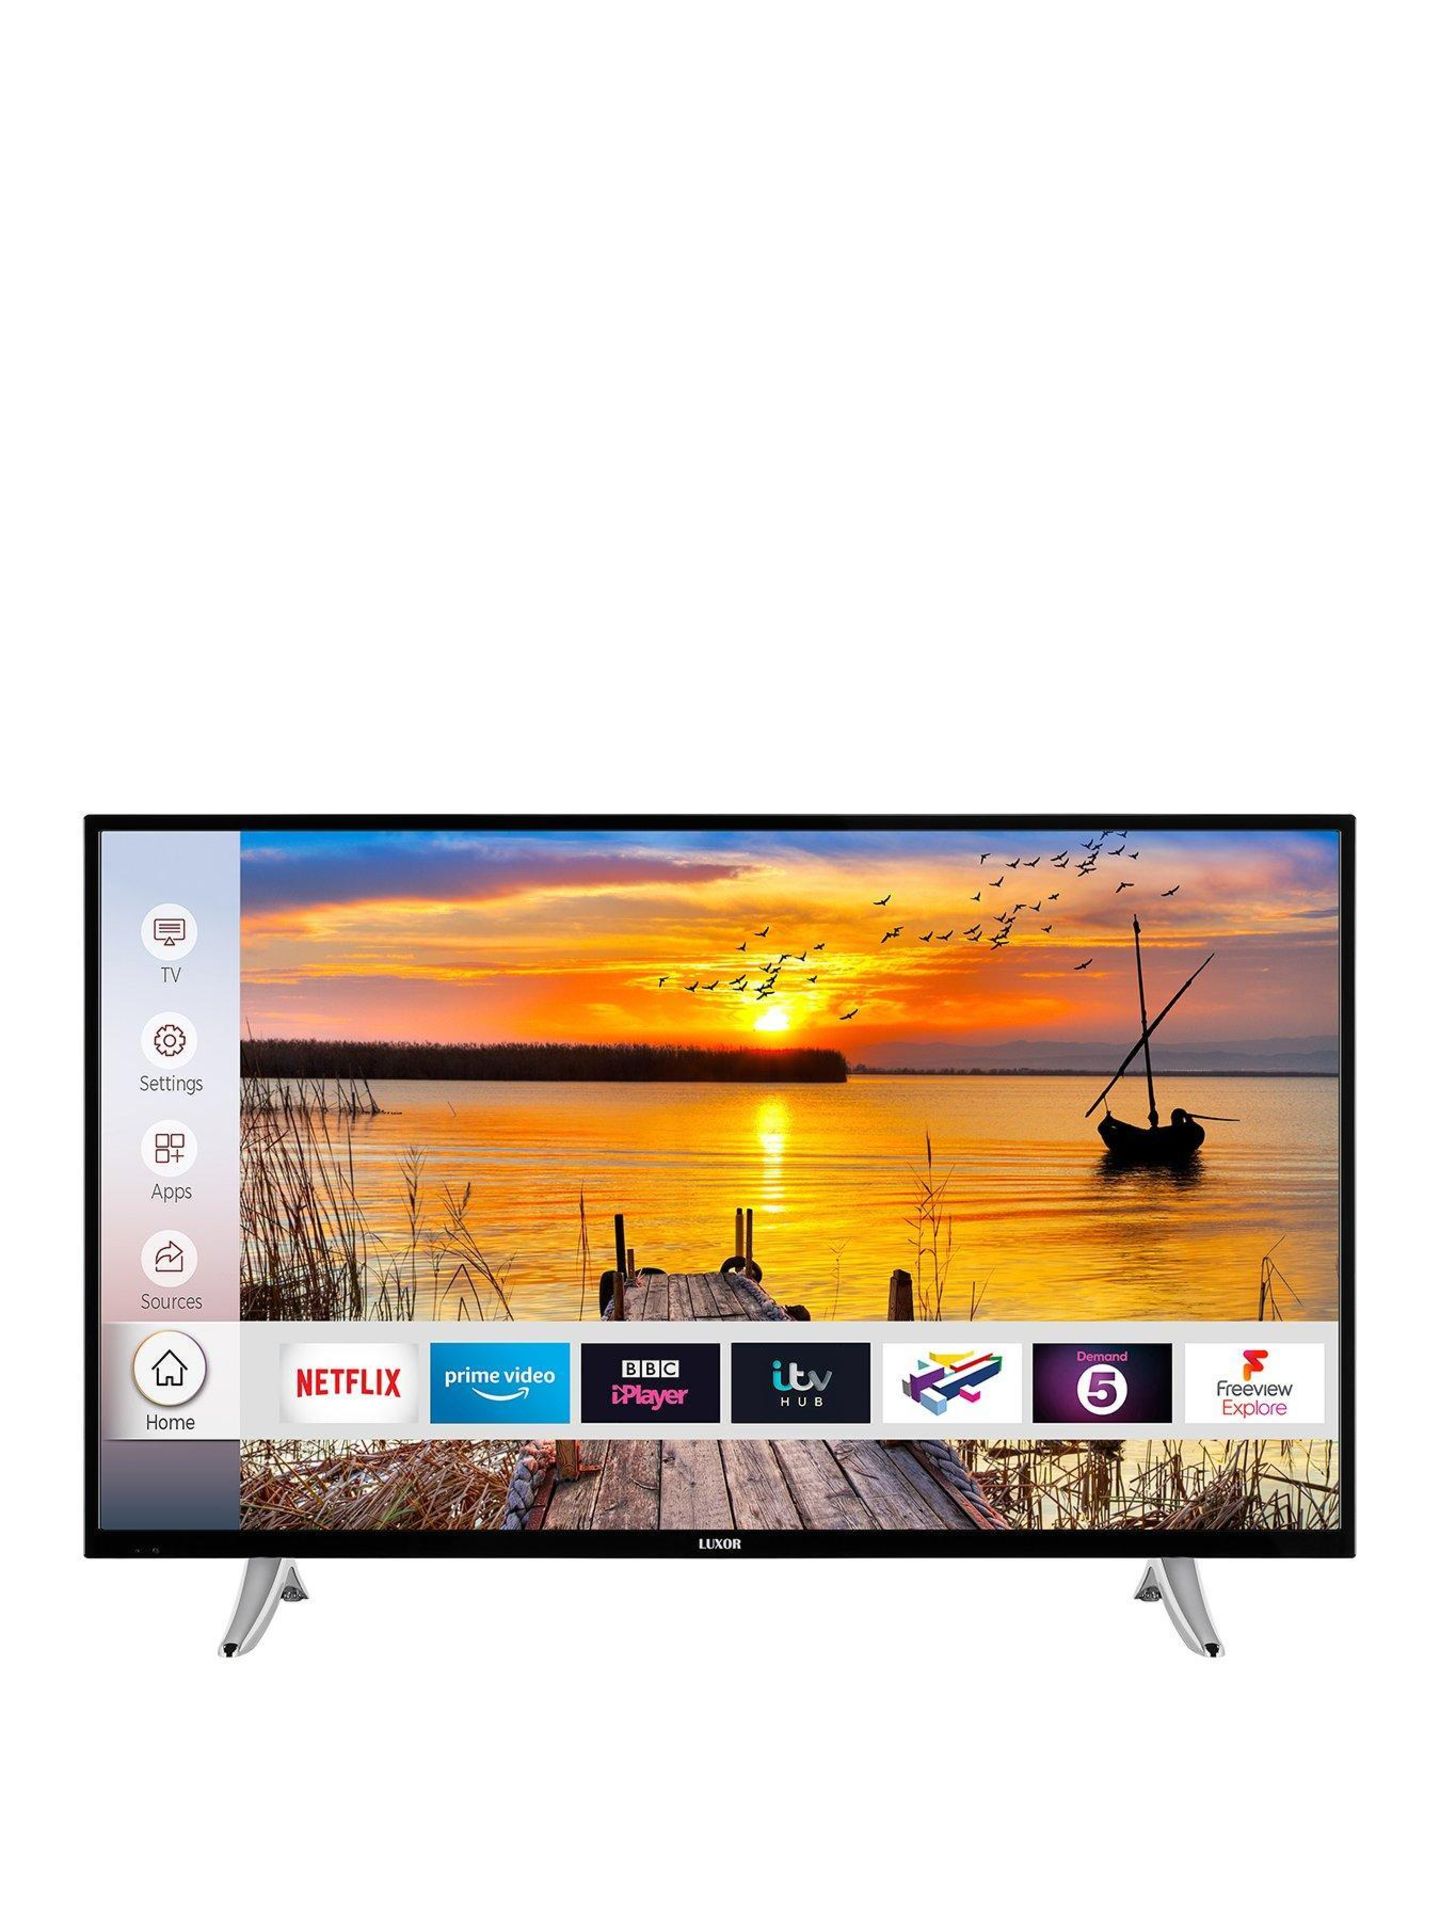 Luxor 43 inch 4k uhd , freeview play, smart tv [black] 63x98x28cm rrp: £472.0 - Image 2 of 2